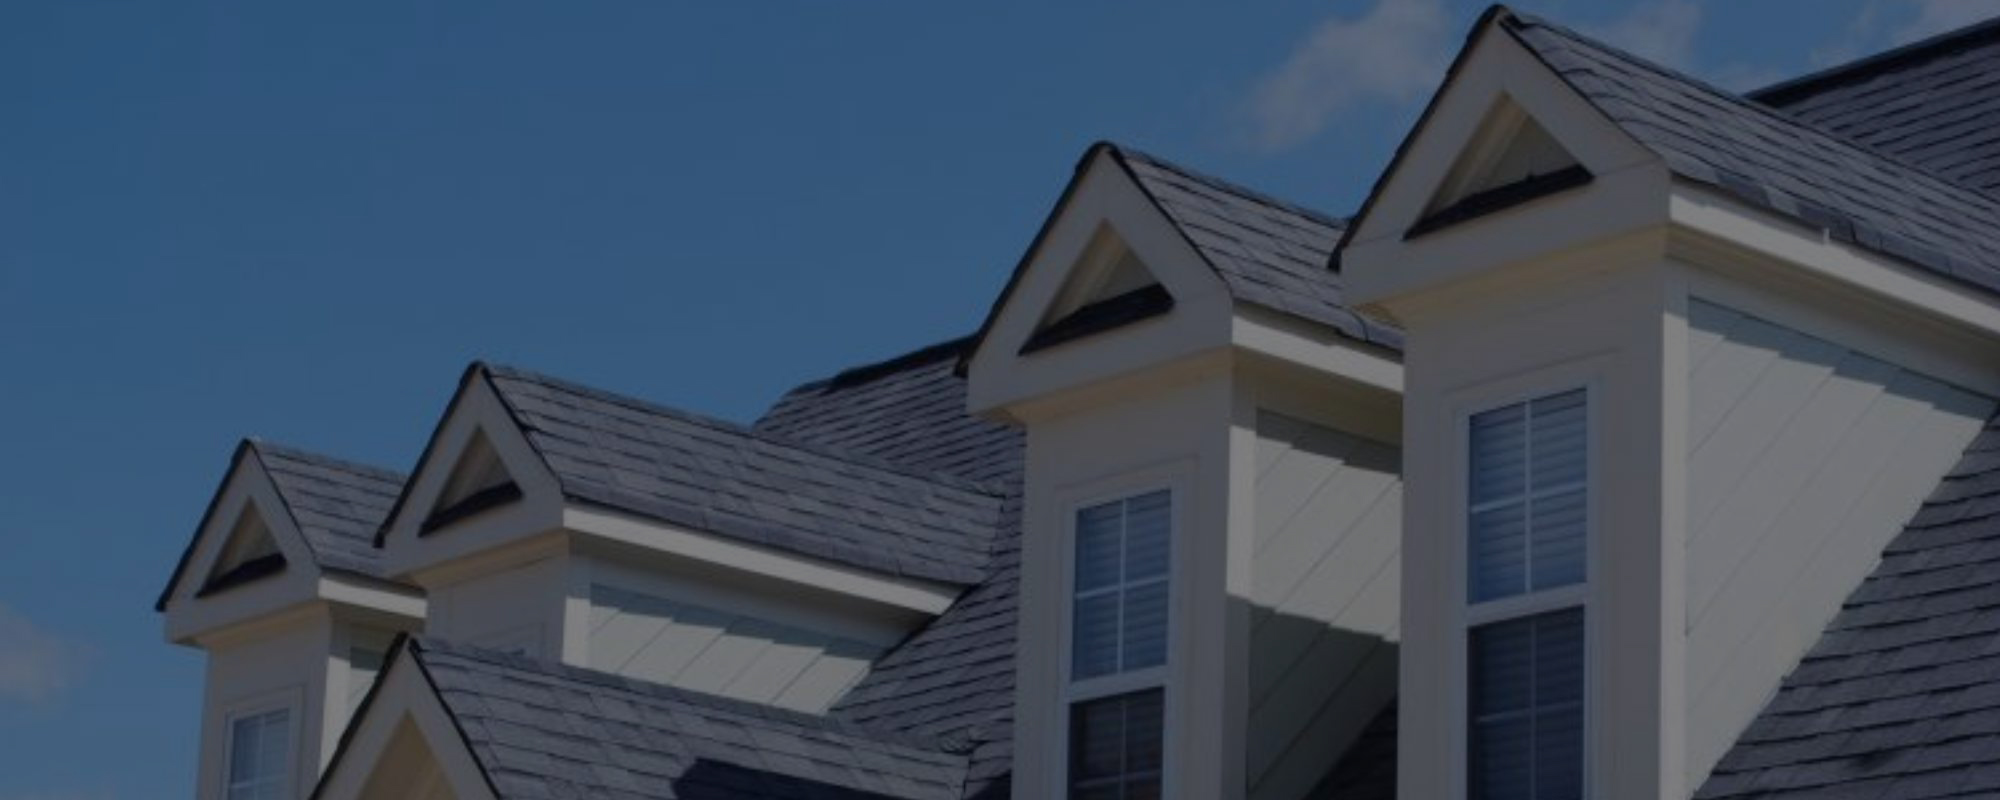 west island roofing companies, roofing companies, best tile roofing company, roofing company